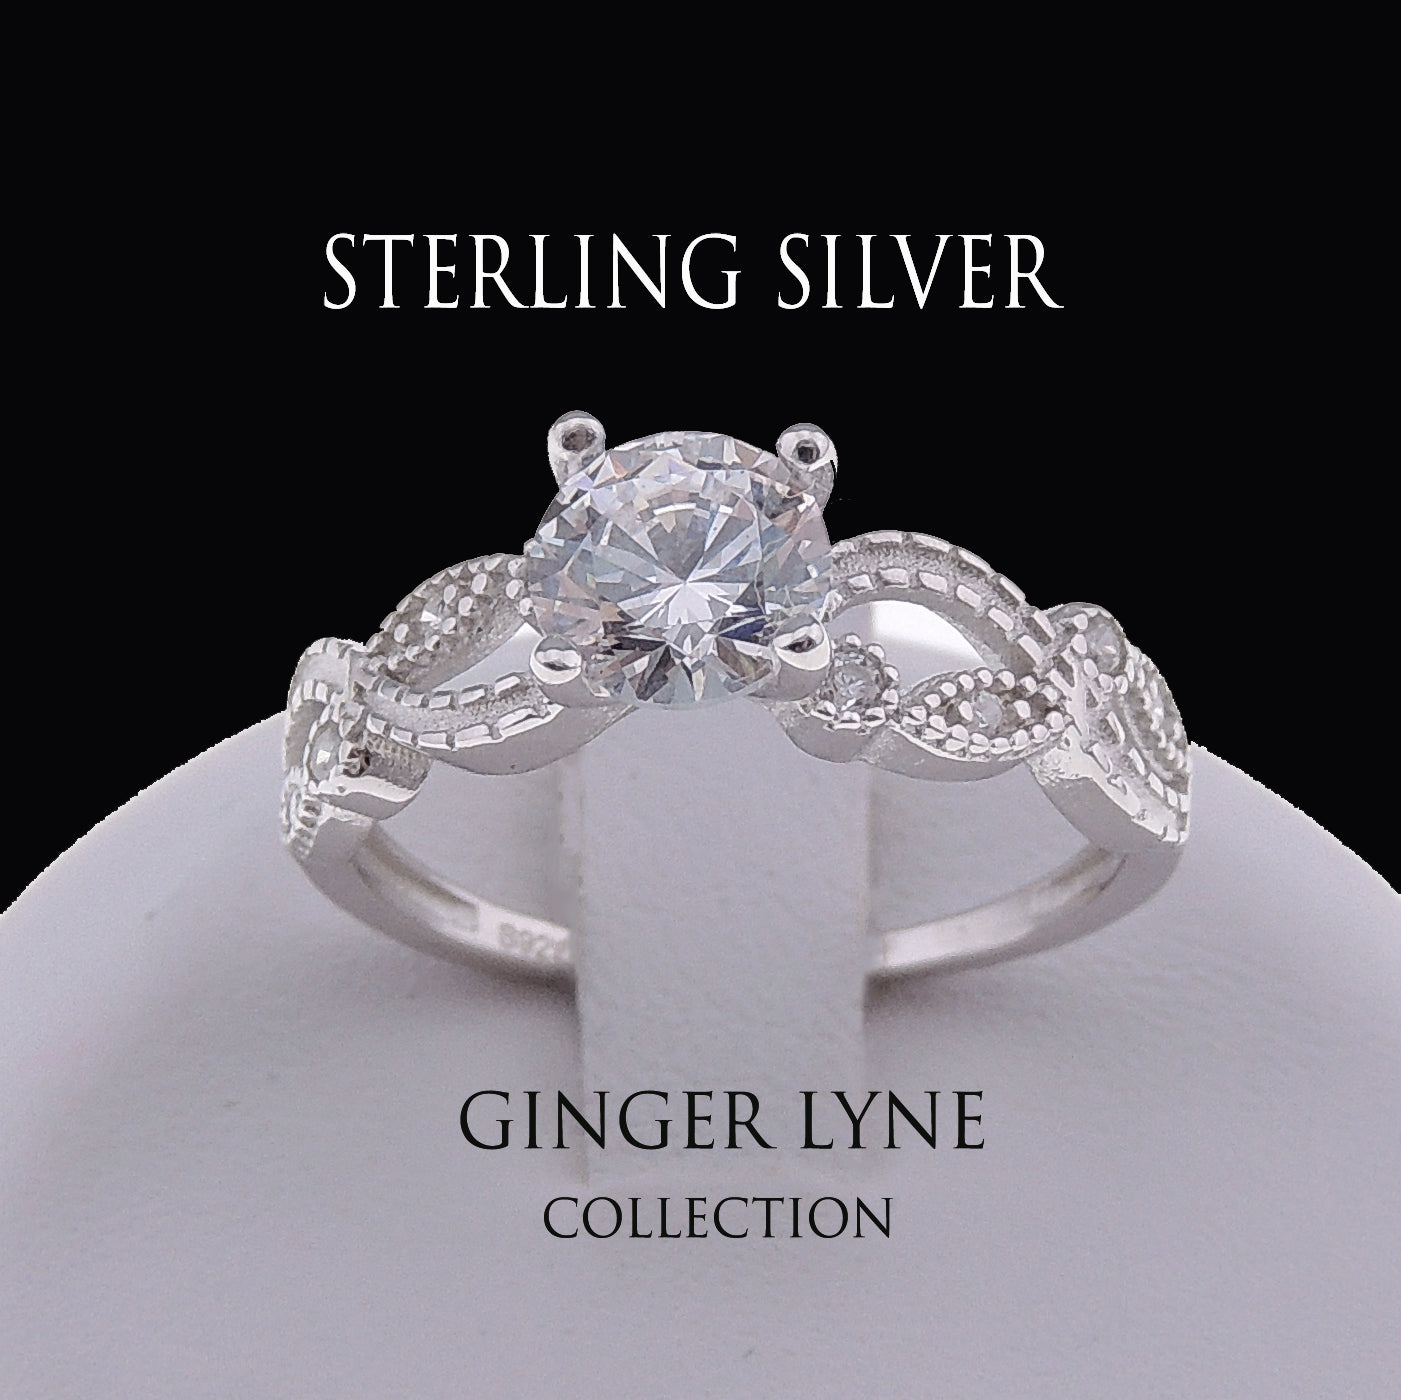 Engagement Ring Sterling Silver Cz Versia Filigree Womens Ginger Lyne Collection - 10